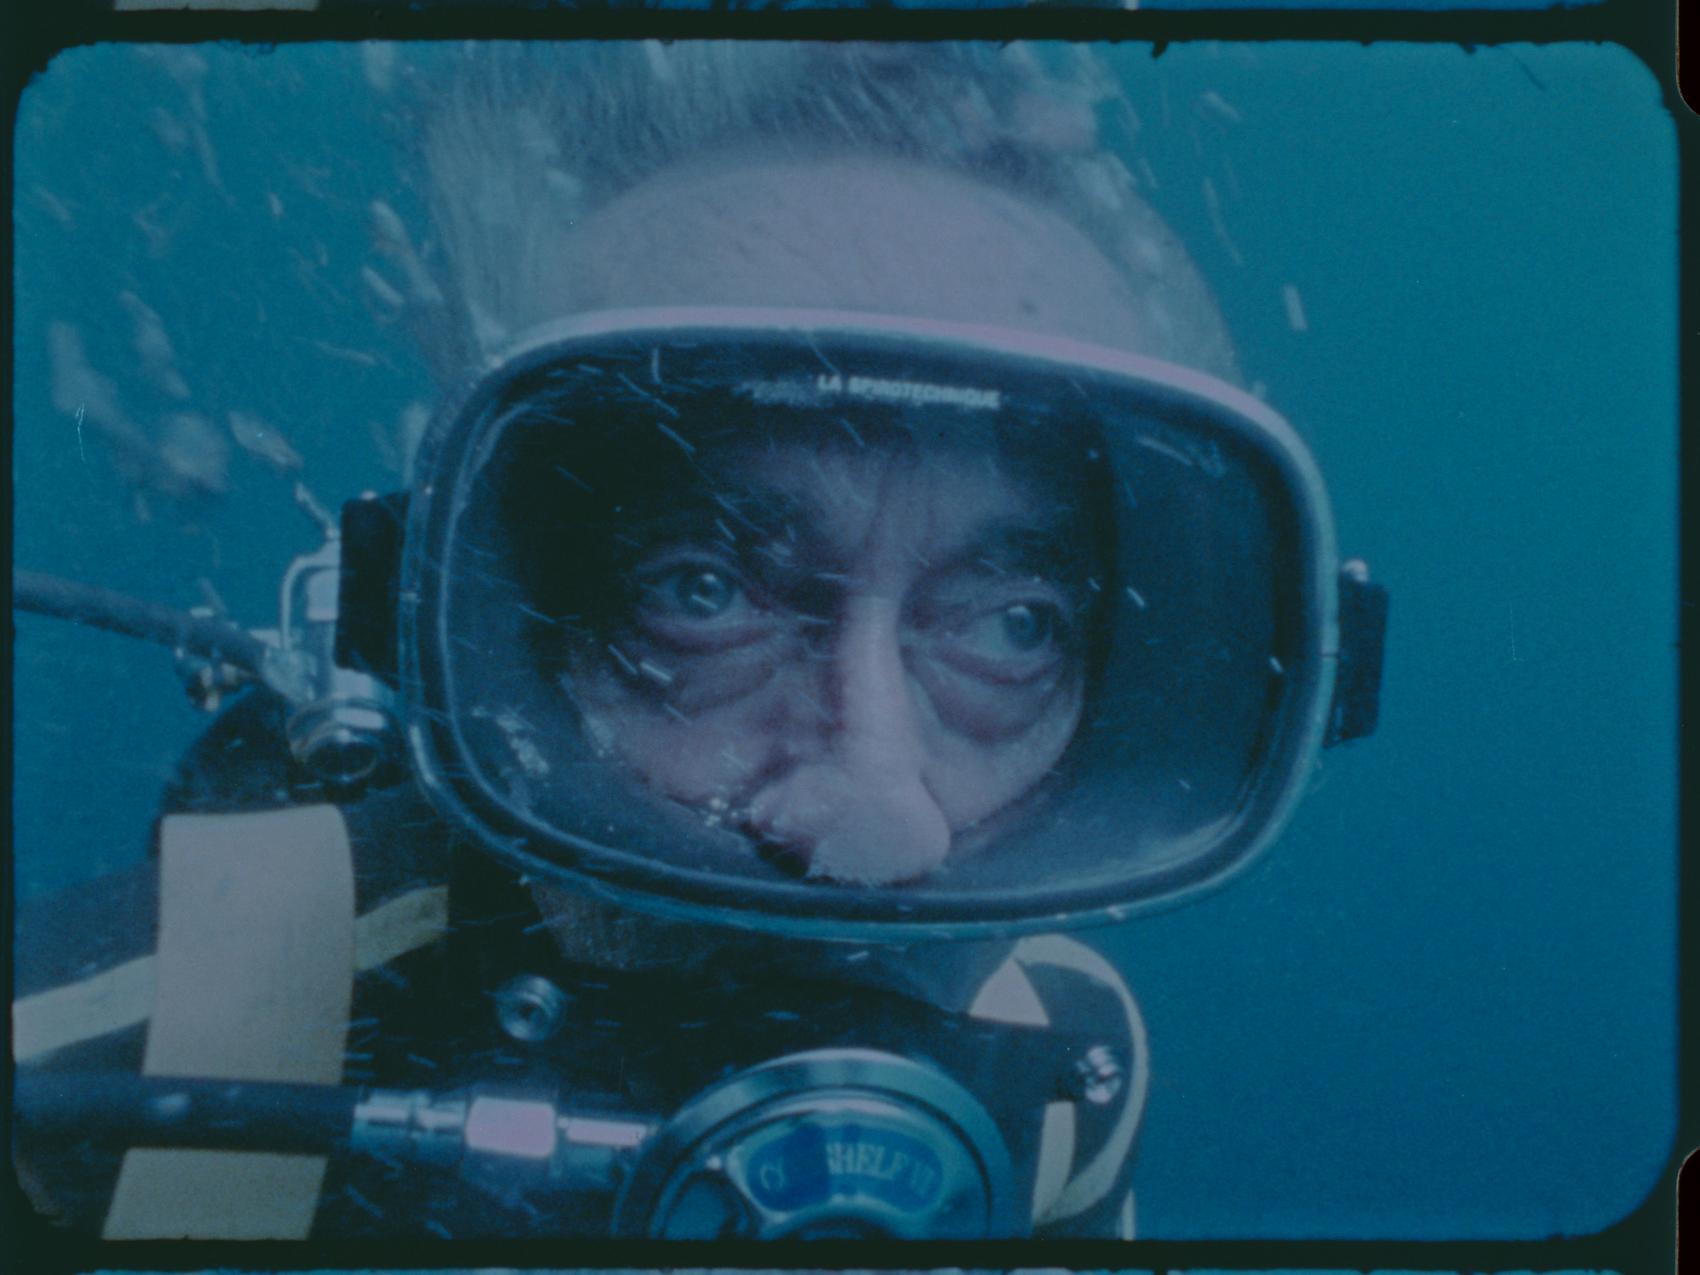 ”Becoming Cousteau”.